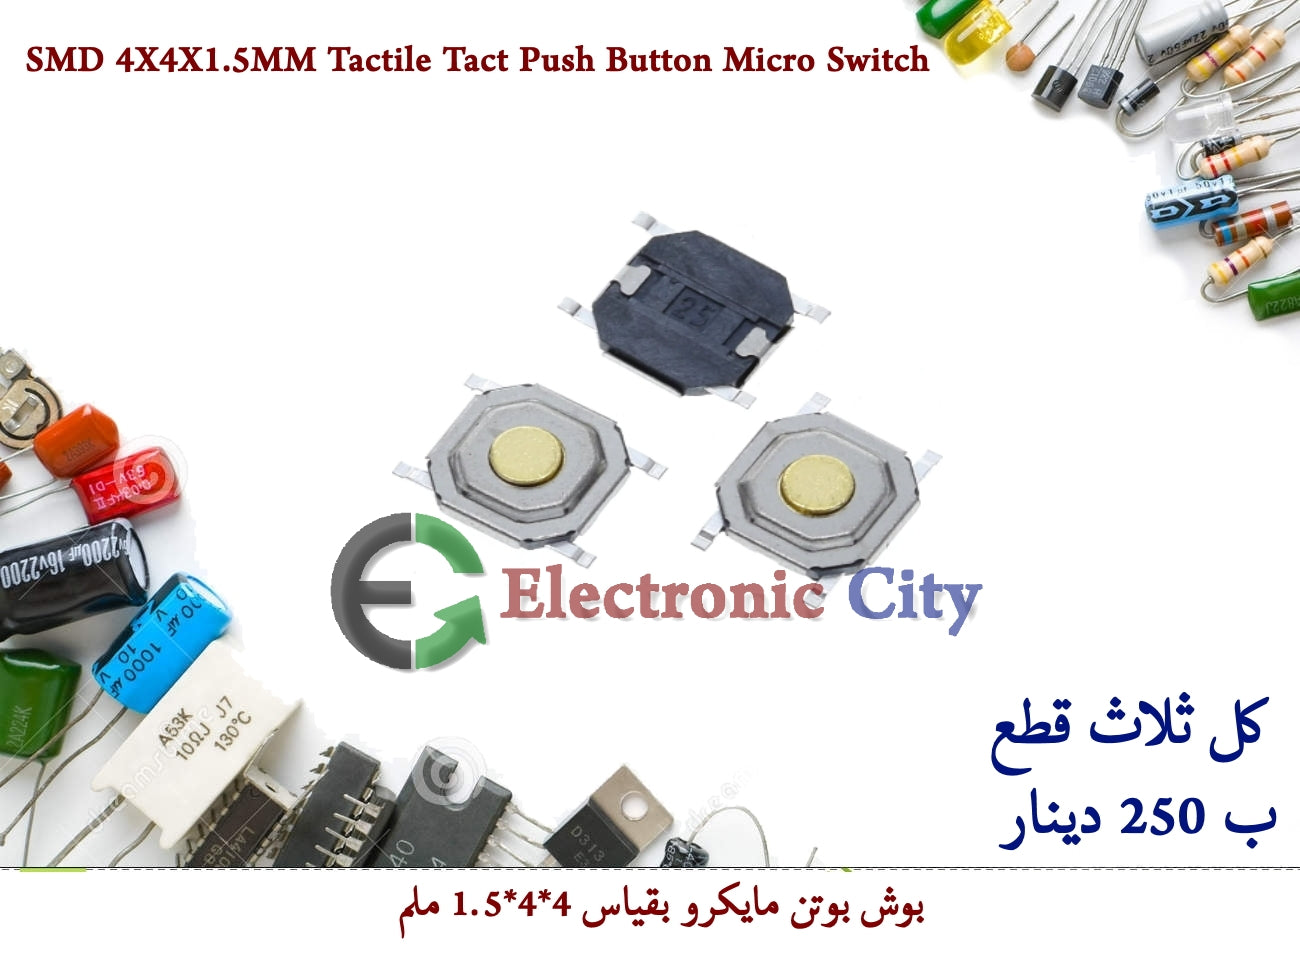 SMD 4X4X1.5MM Tactile Tact Push Button Micro Switch